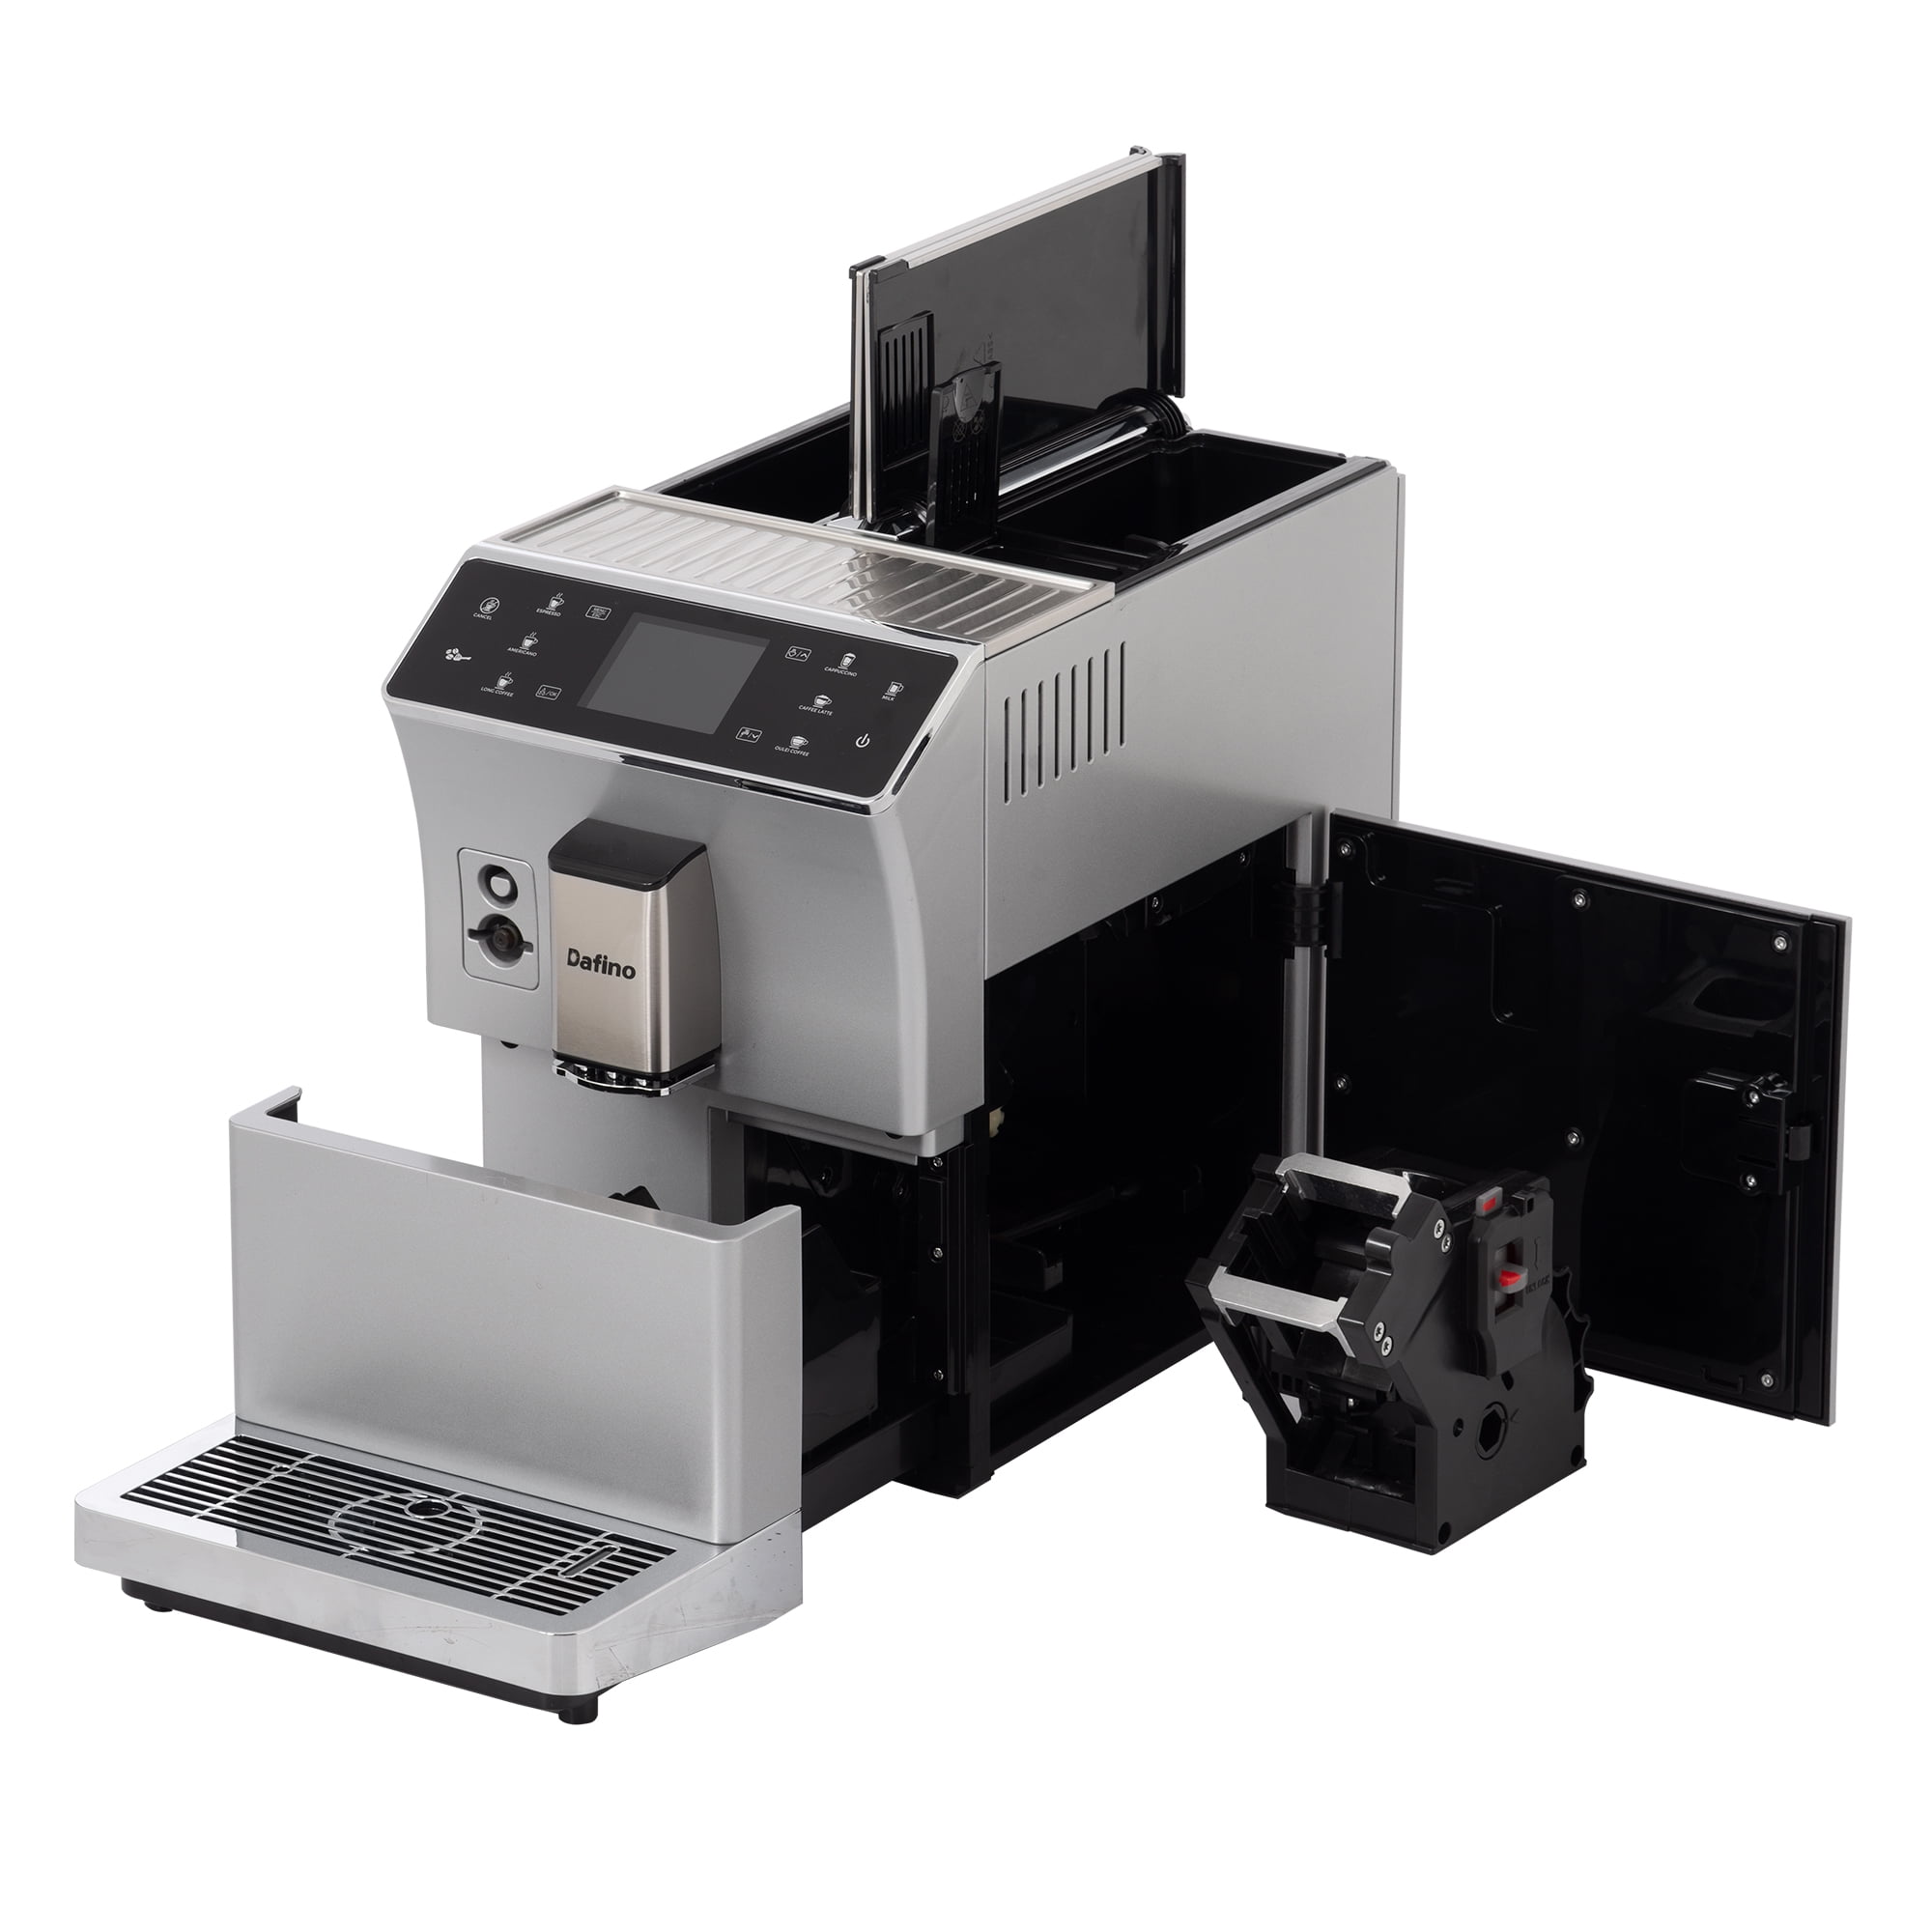 Kolice Fully Automatic Cappuccino Coffee Maker Smart Coffee Machine, With  Milk Frother For Espresso, Latte,Amercino From Kolice, $1,002.52